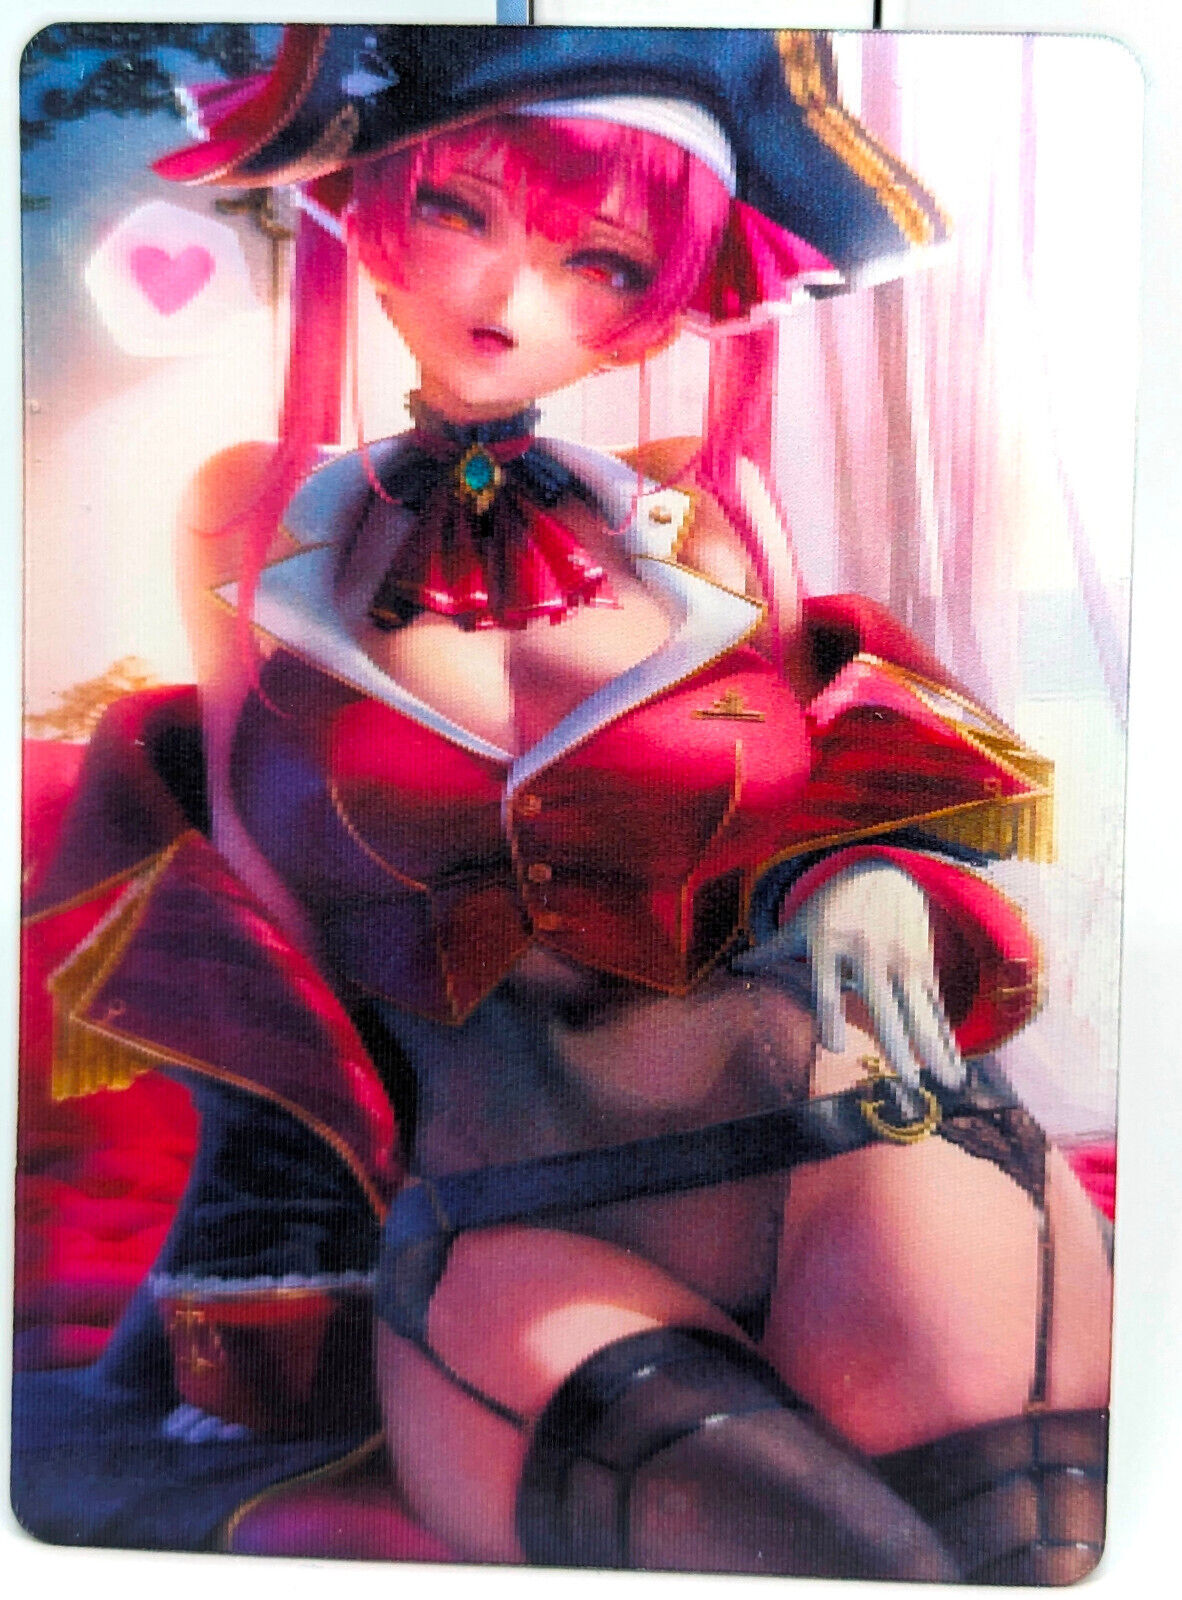 Sexy Anime ACG Lewds - Lone Wolf 3D Lenticular Reveal - Pirate Girl